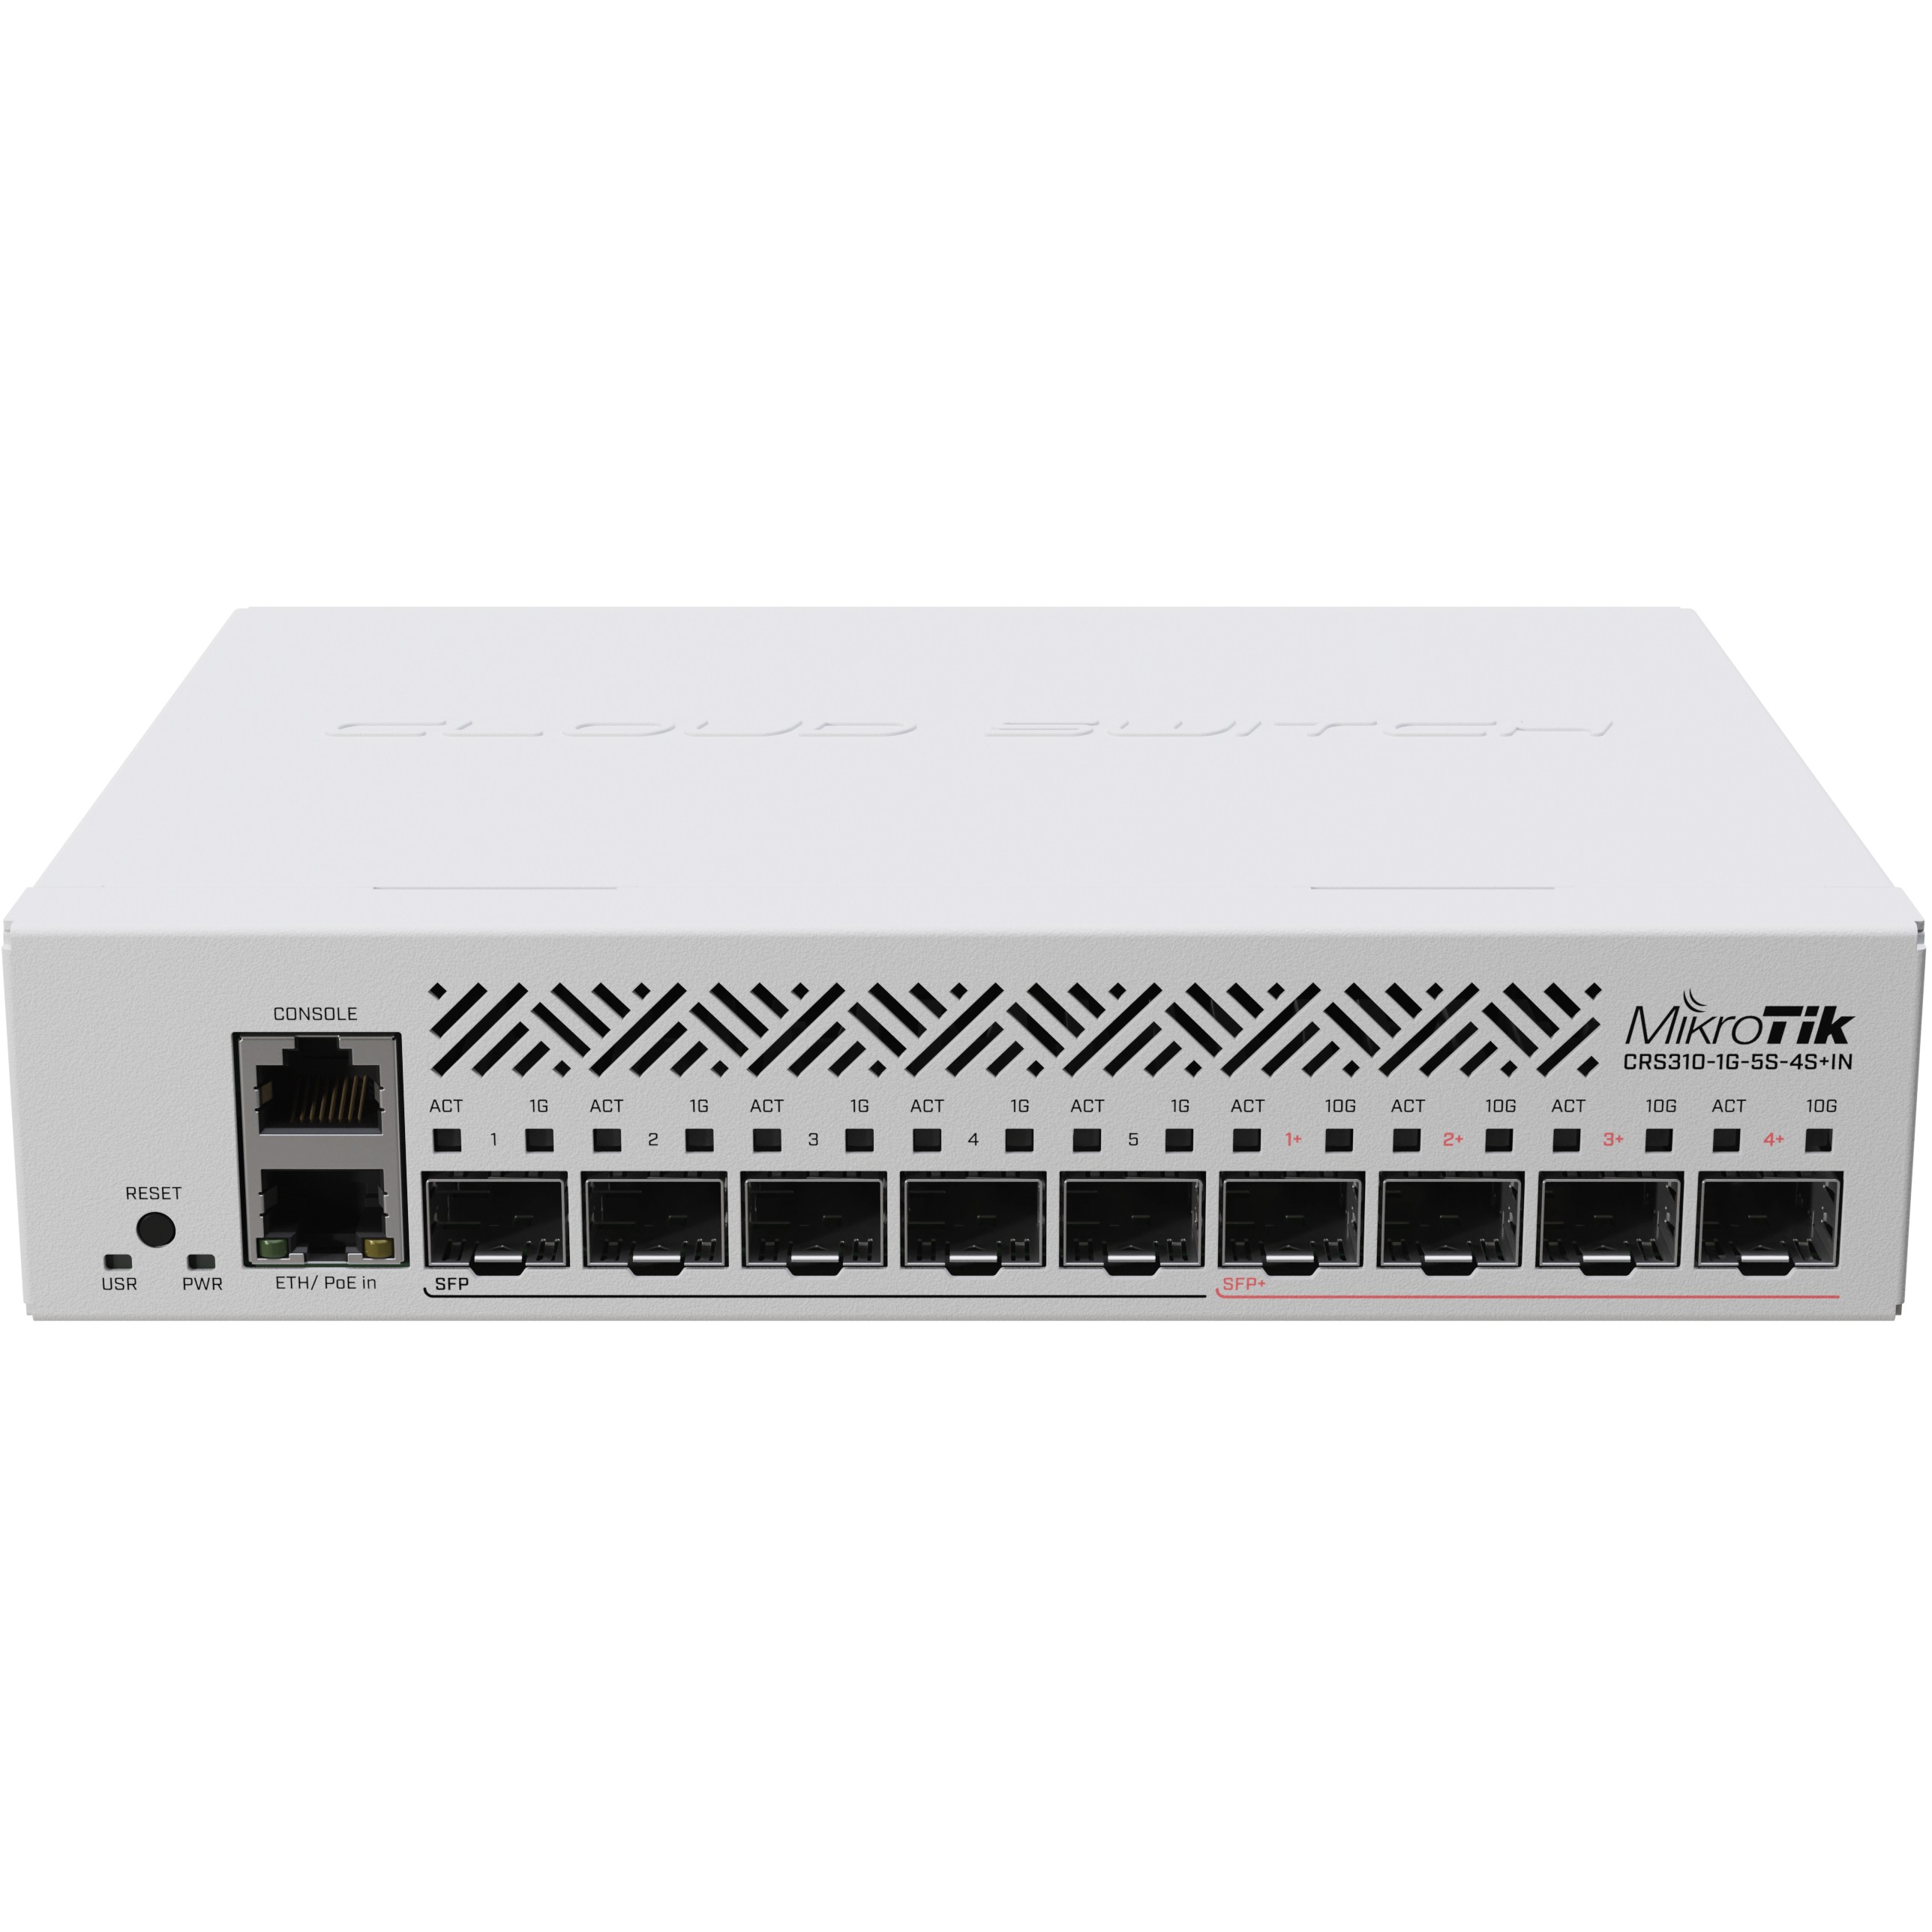 Mikrotik CRS310-1G-5S-4S+IN network switch - CRS310-1G-5S-4S+IN